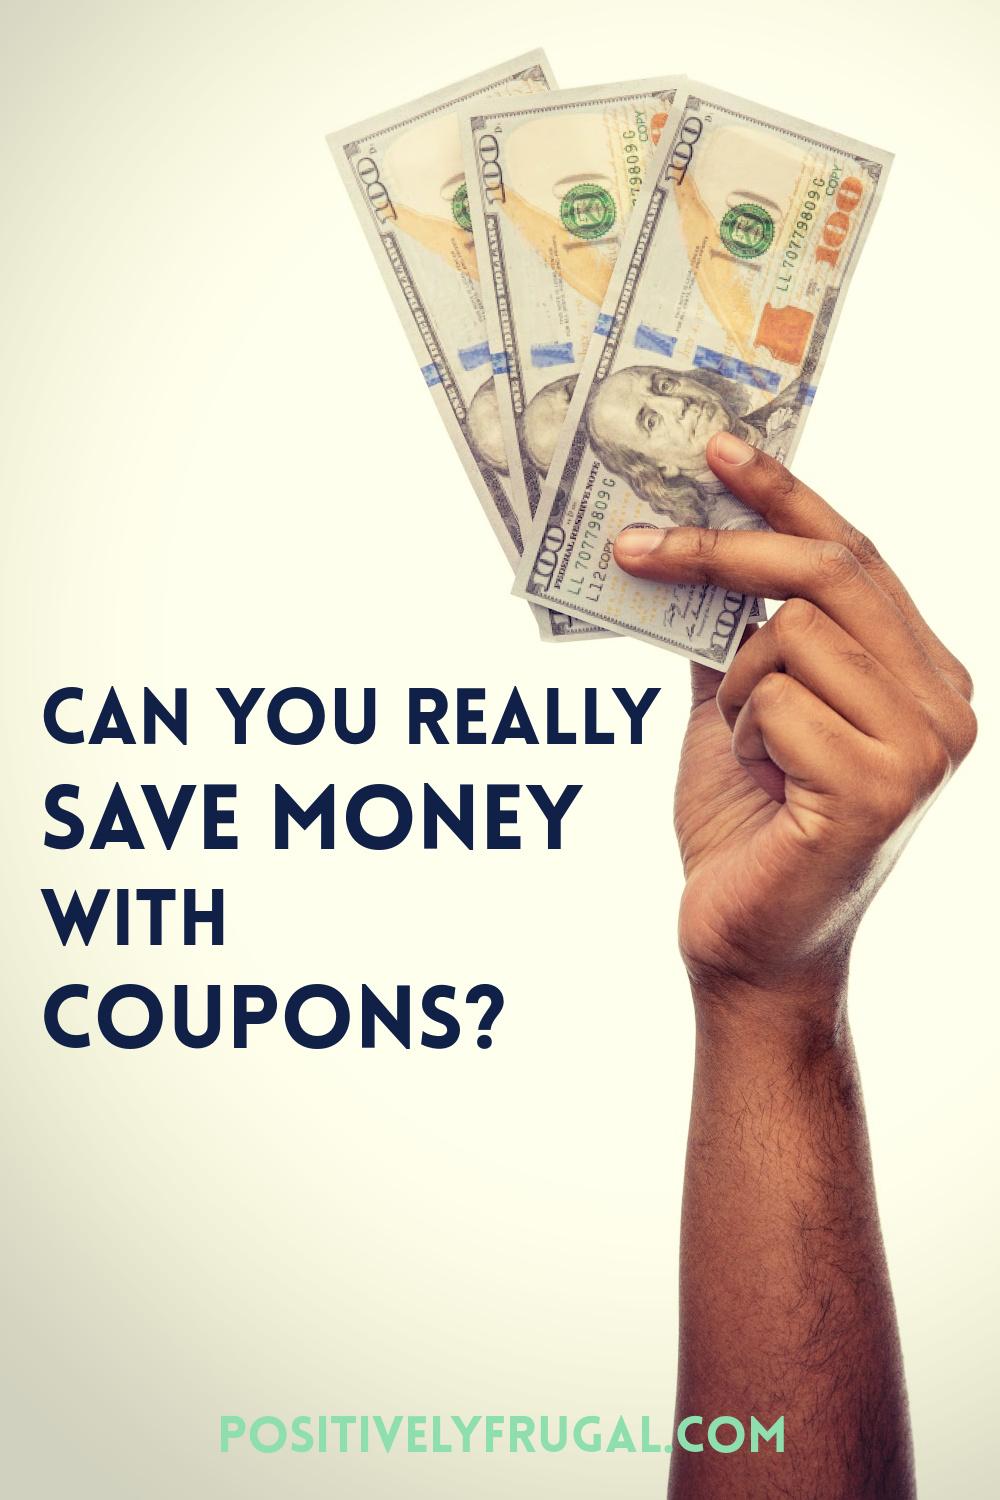 Can you really save money with coupons